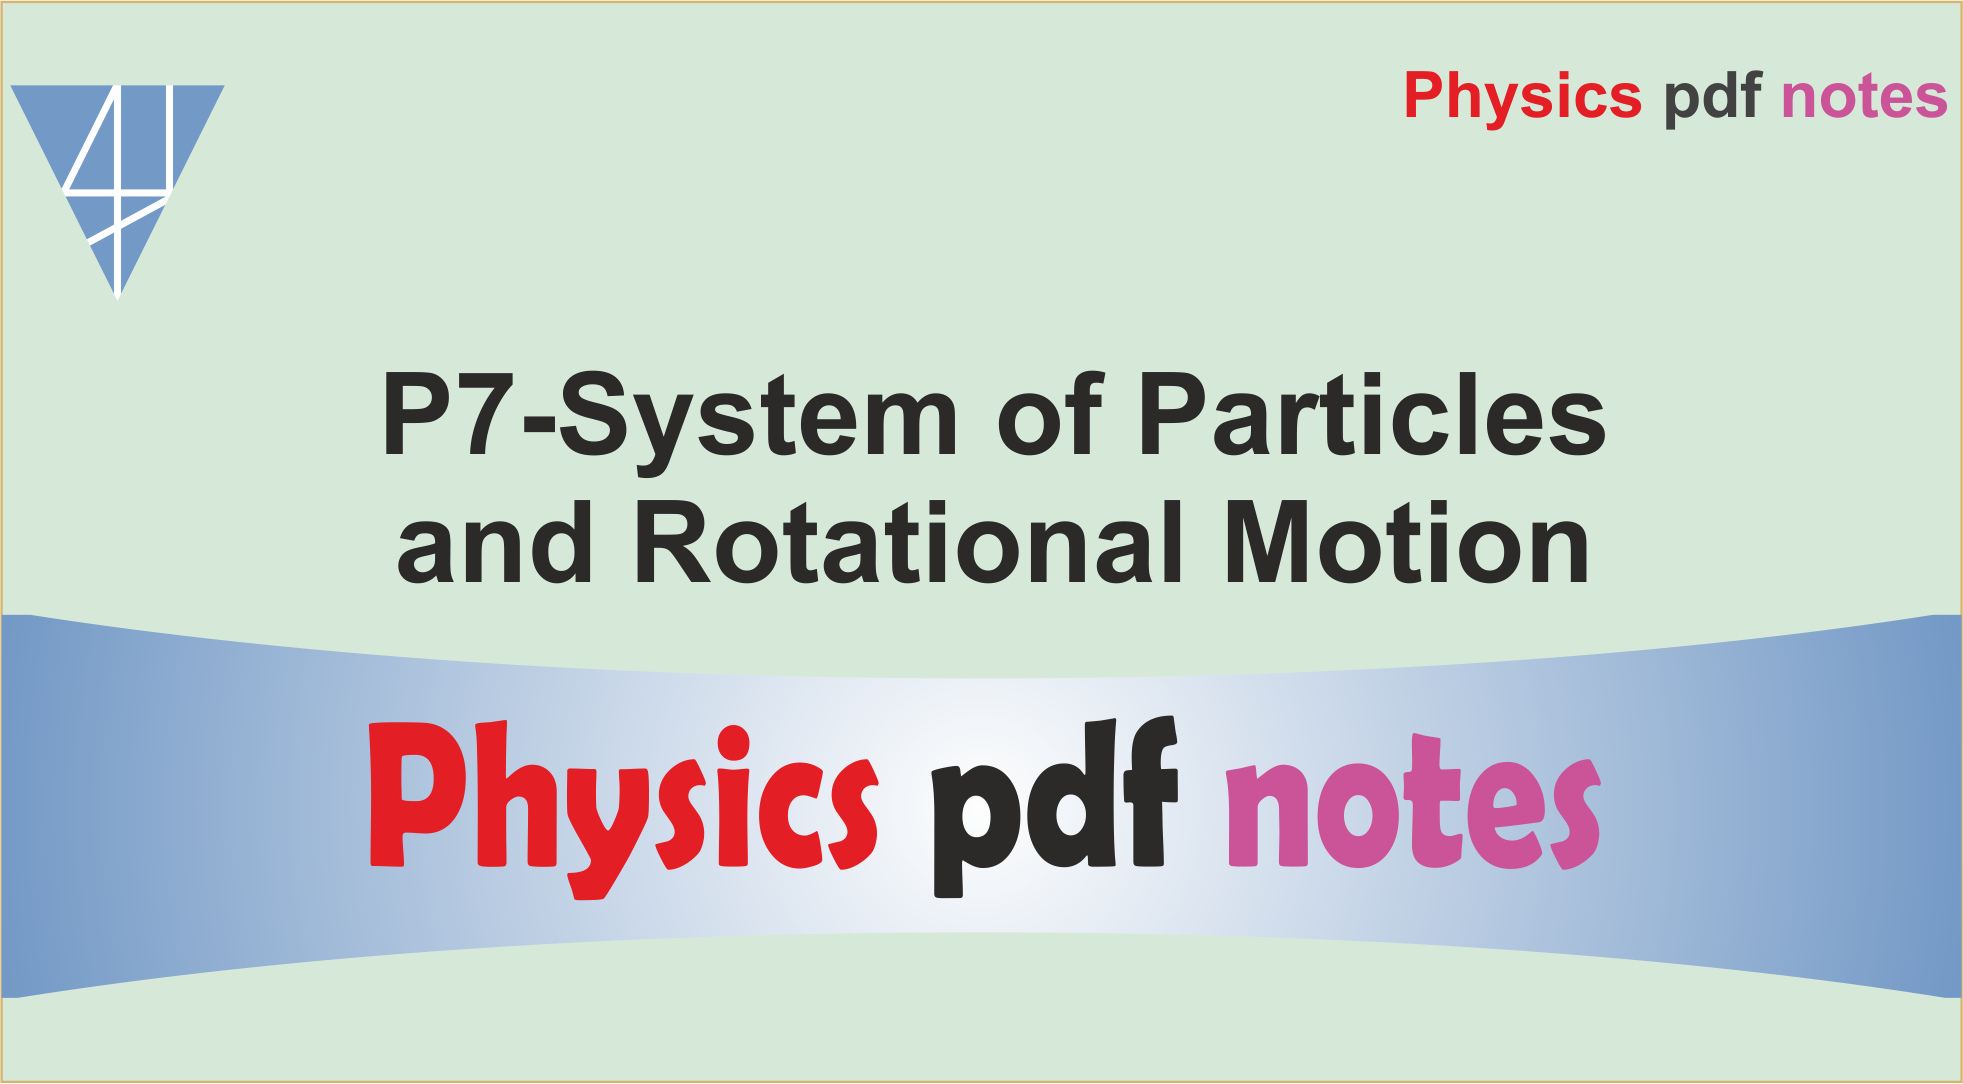 P7-System of Particles & Rotational Motion